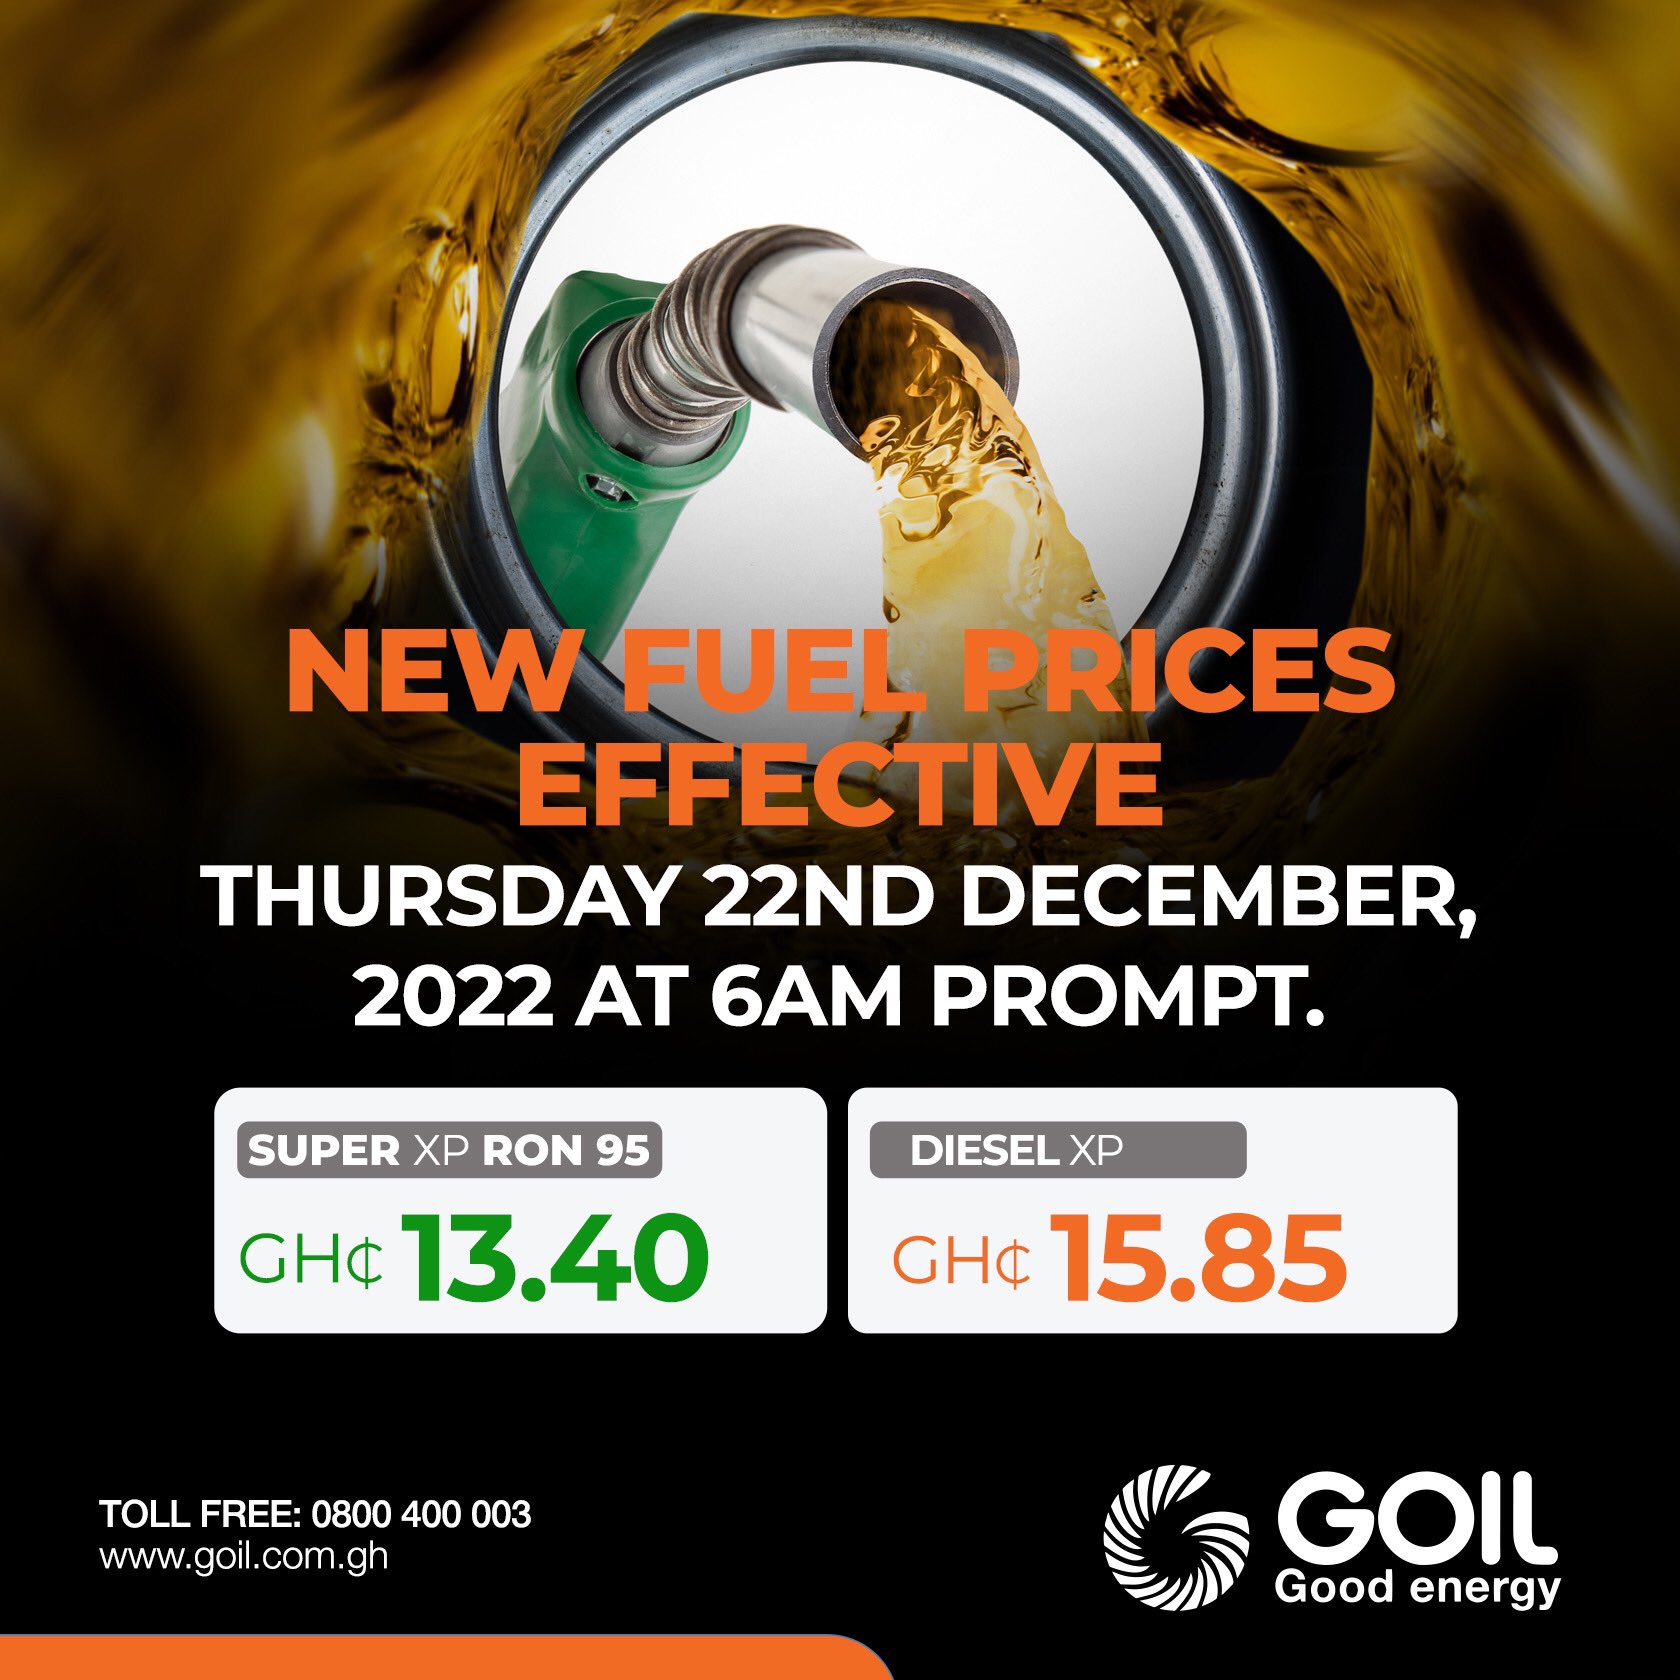 Goil new fuel prices effective 22nd Dec Out